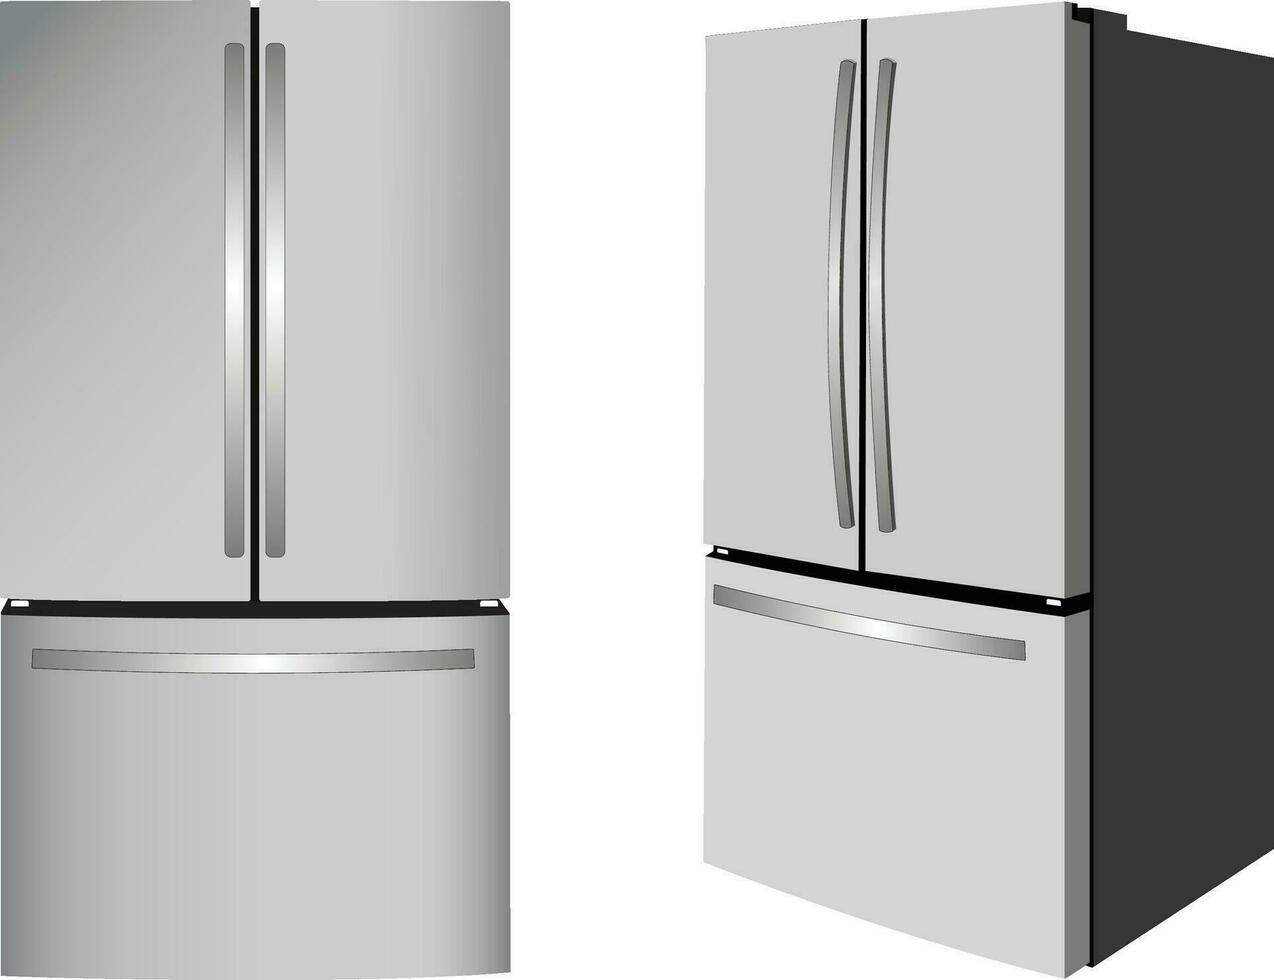 French door refrigerator or Refrigerator with four doors and internal water dispenser vector image illustration in different angles